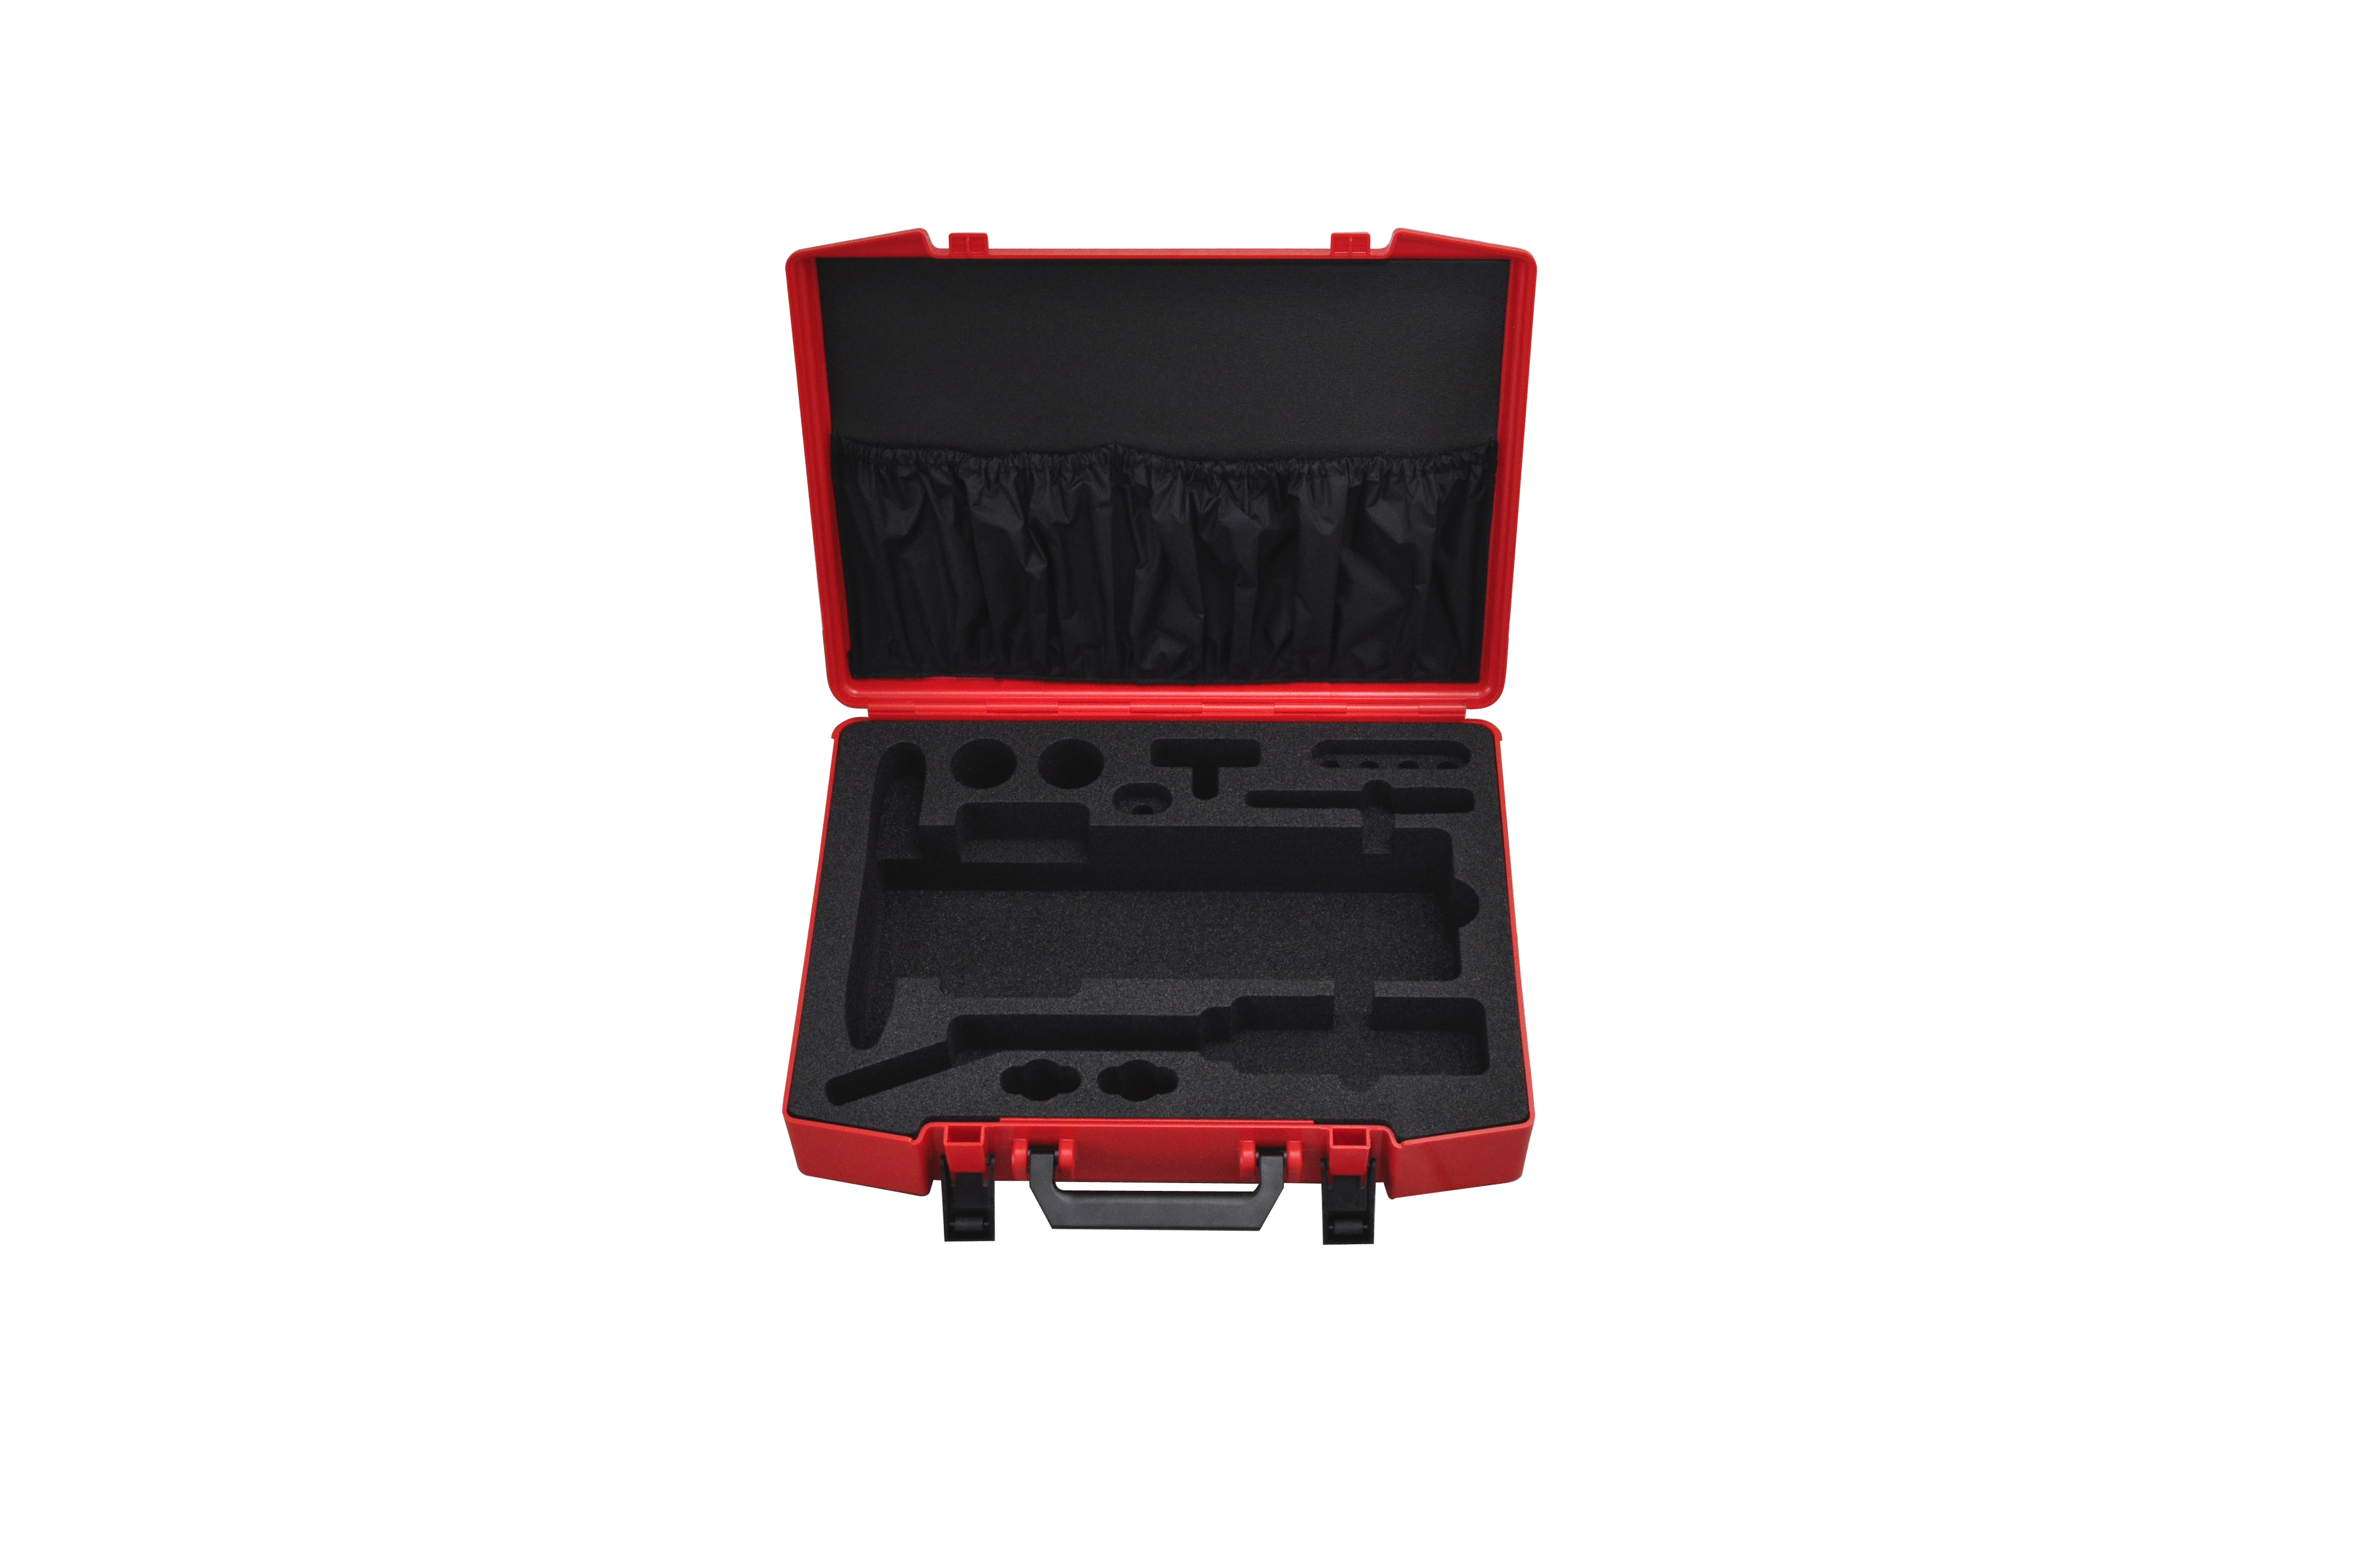 Carrying case with foam insert for handheld measuring devices